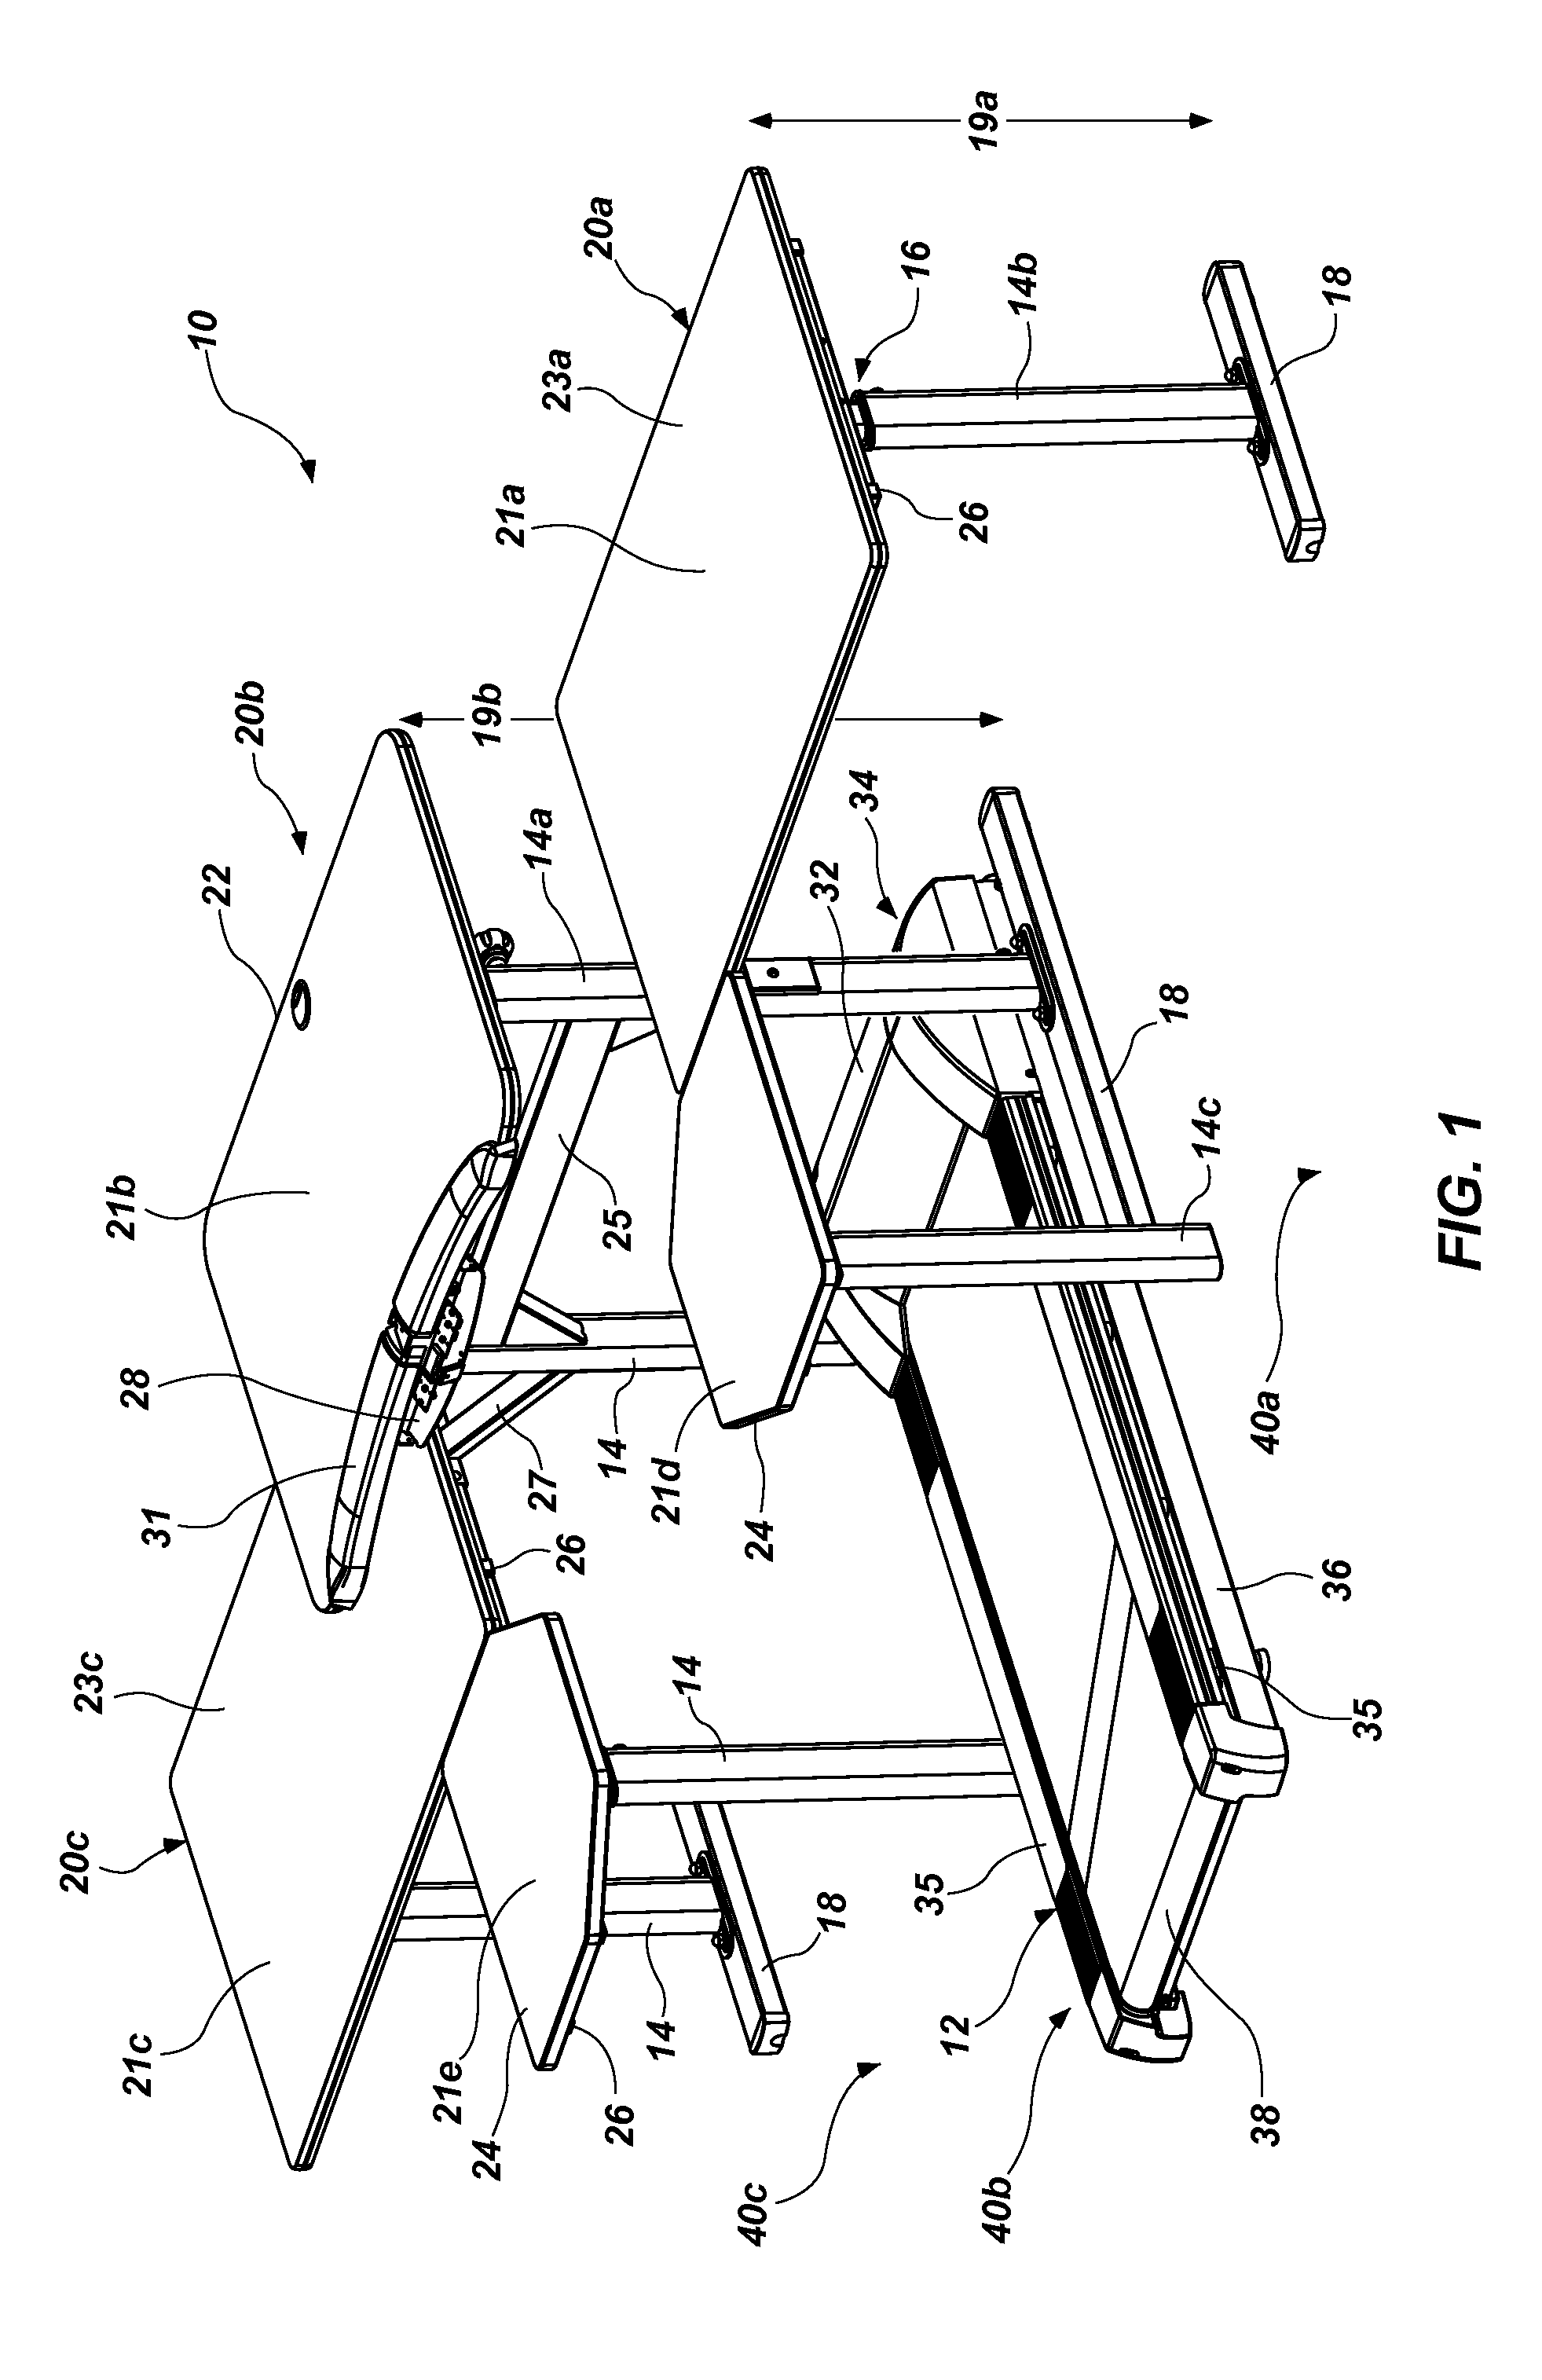 Active workstation apparatus and method